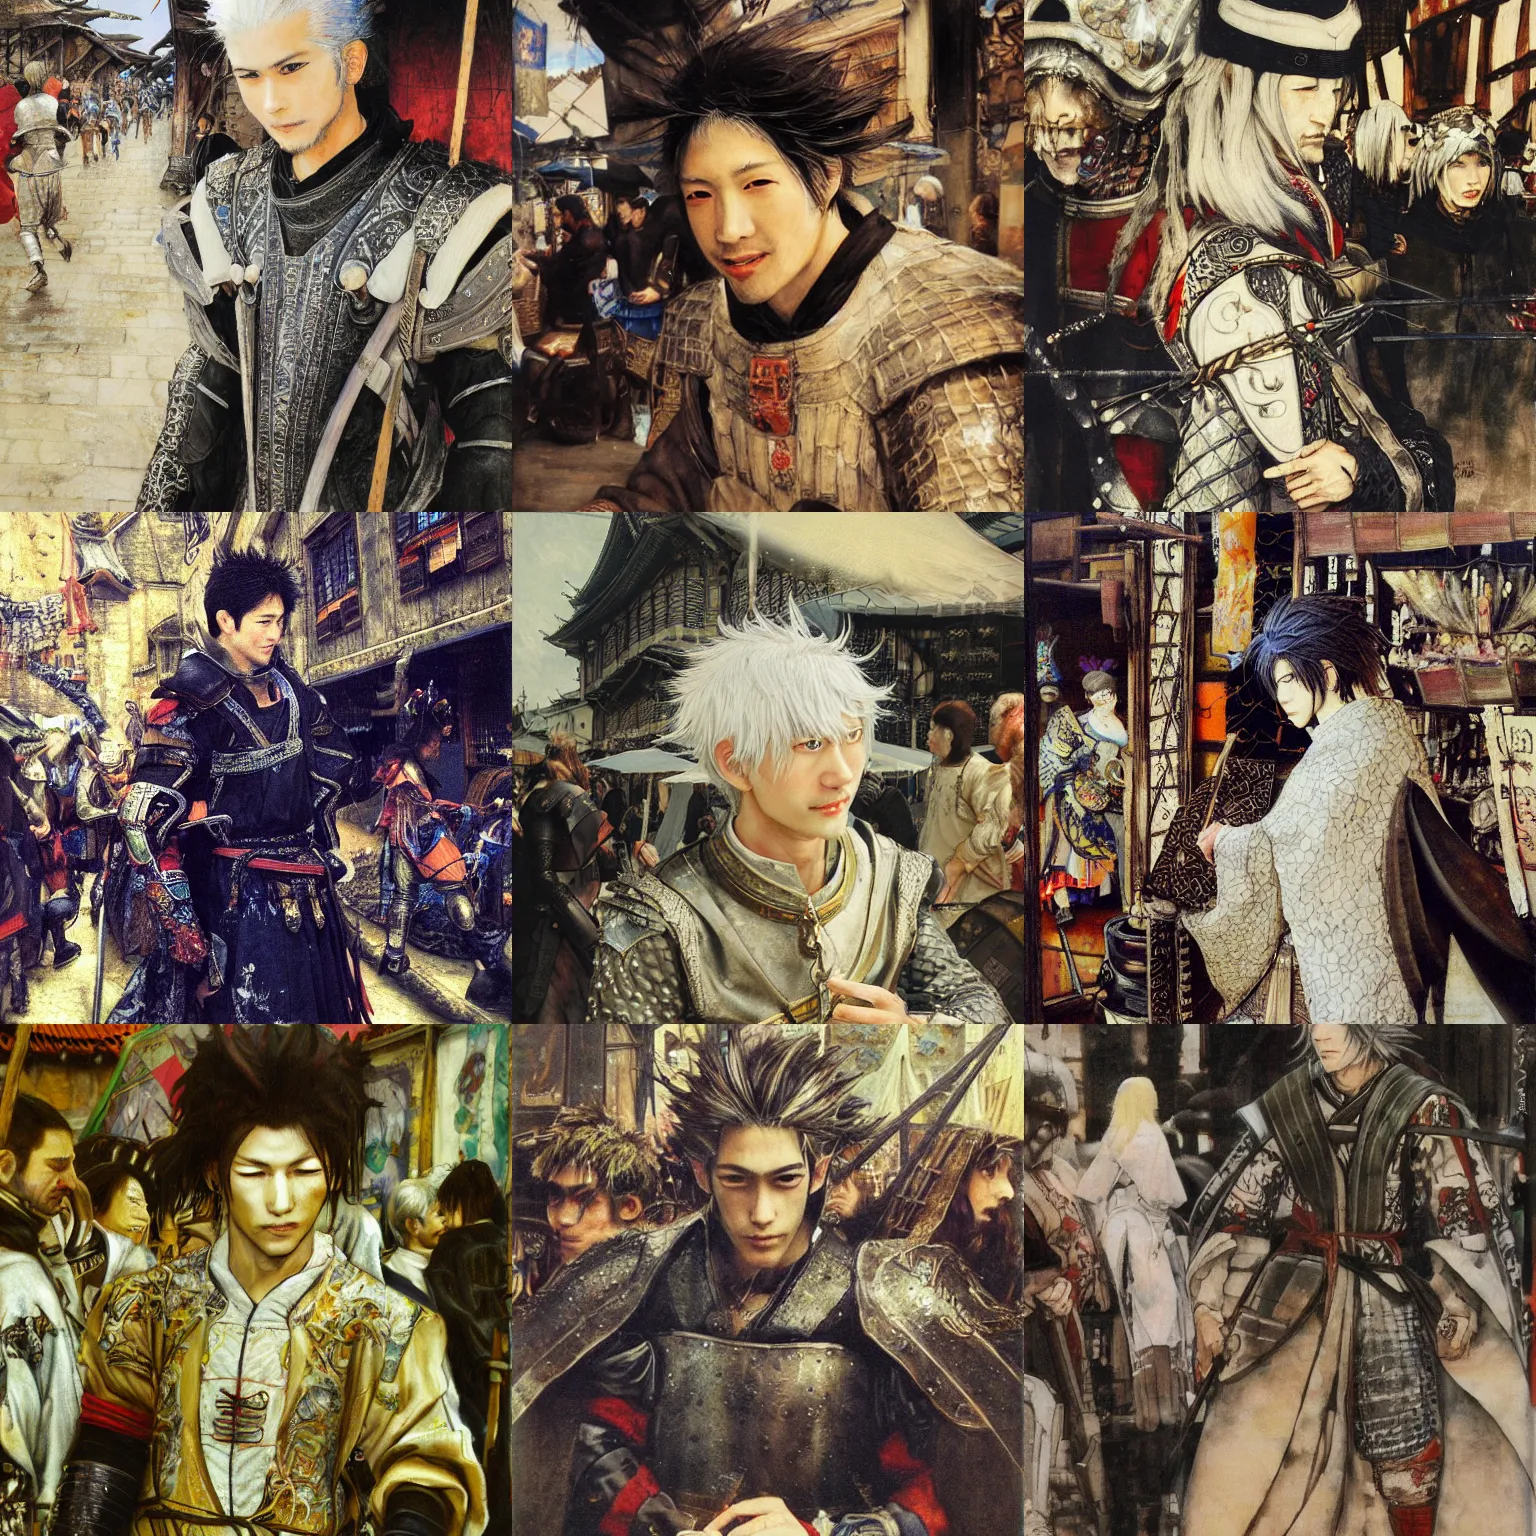 Prompt: Yoshitaka Amano painting of a young cool looking man at a medieval market at windy day. Depth of field. White hair, He is wearing complex fantasy armors. Renaissance style lighting.